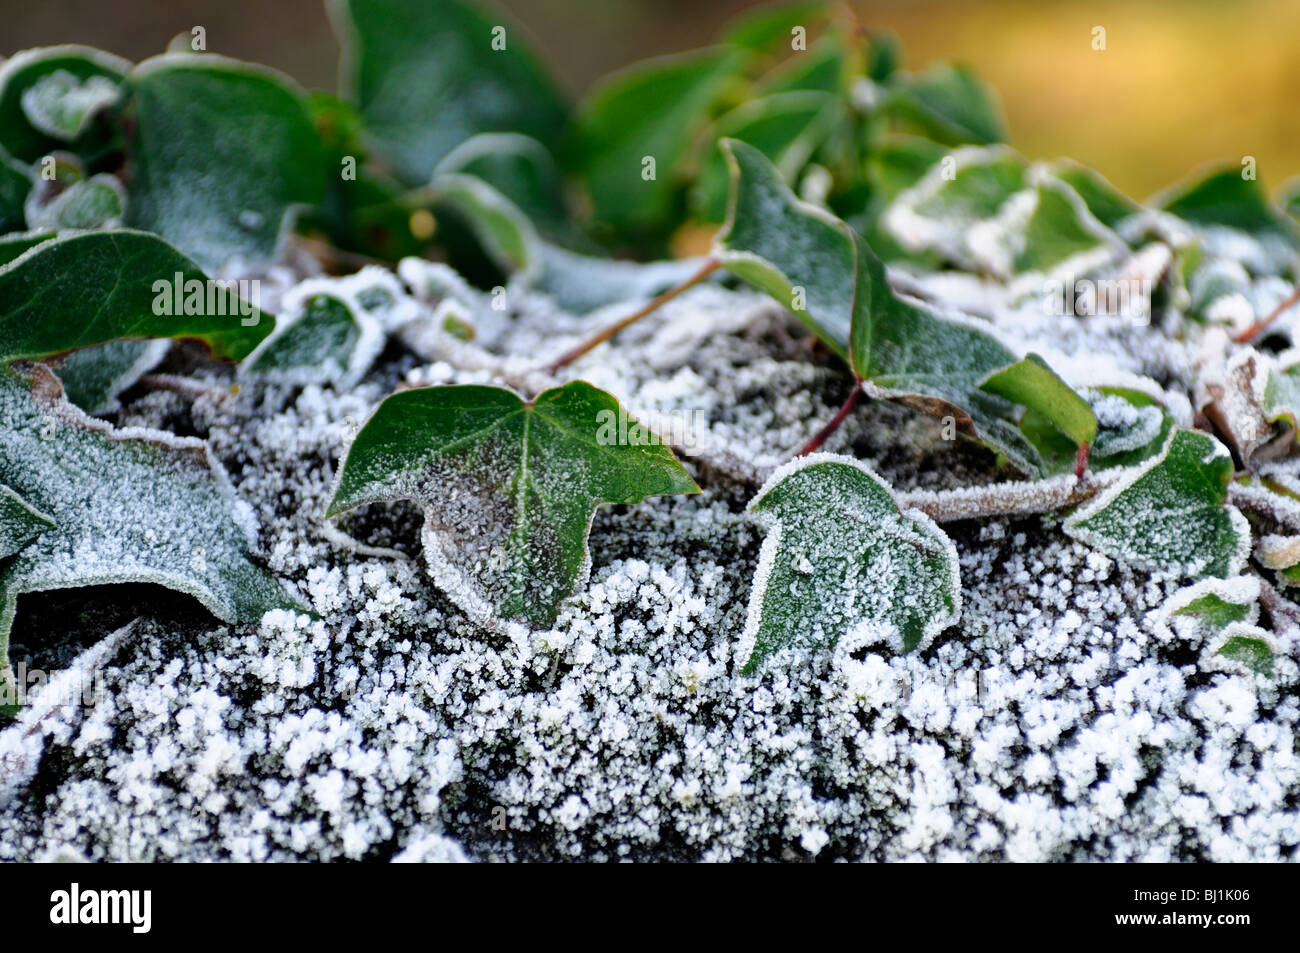 Hedera ivy ivies climbing ground-creeping evergreen woody plants Araliaceae bindwood lovestone hoar frost cover white contrast Stock Photo